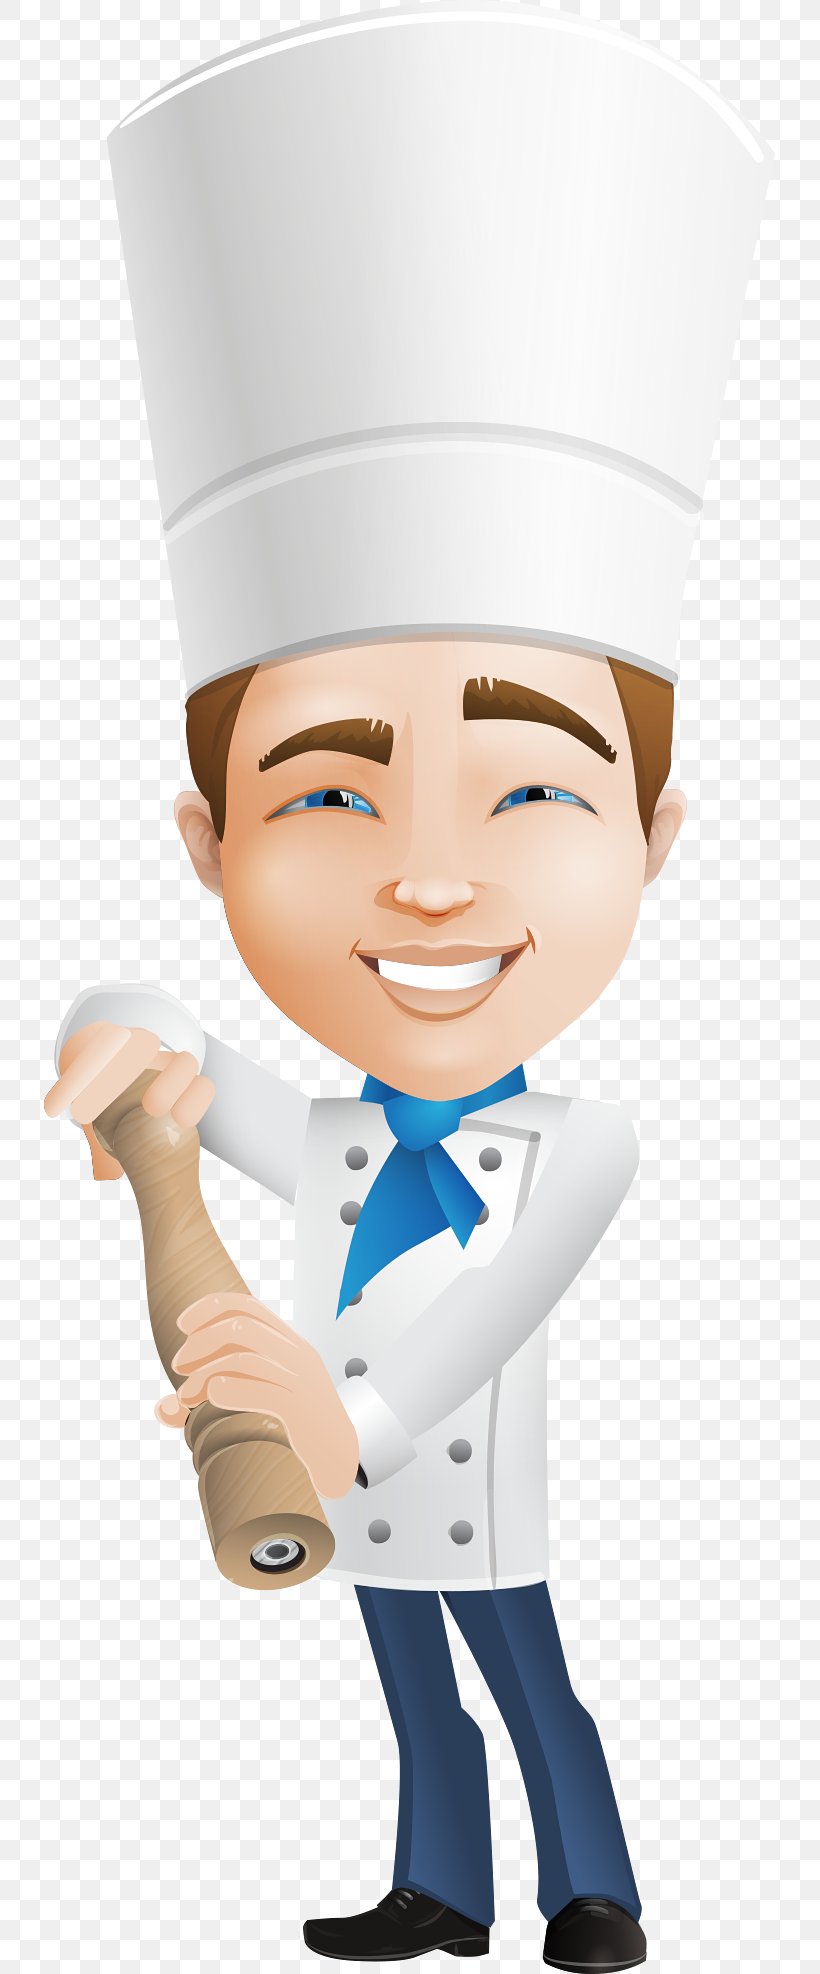 Chef Character Cartoon, PNG, 731x1974px, Chef, Academician, Cartoon, Character, Cook Download Free